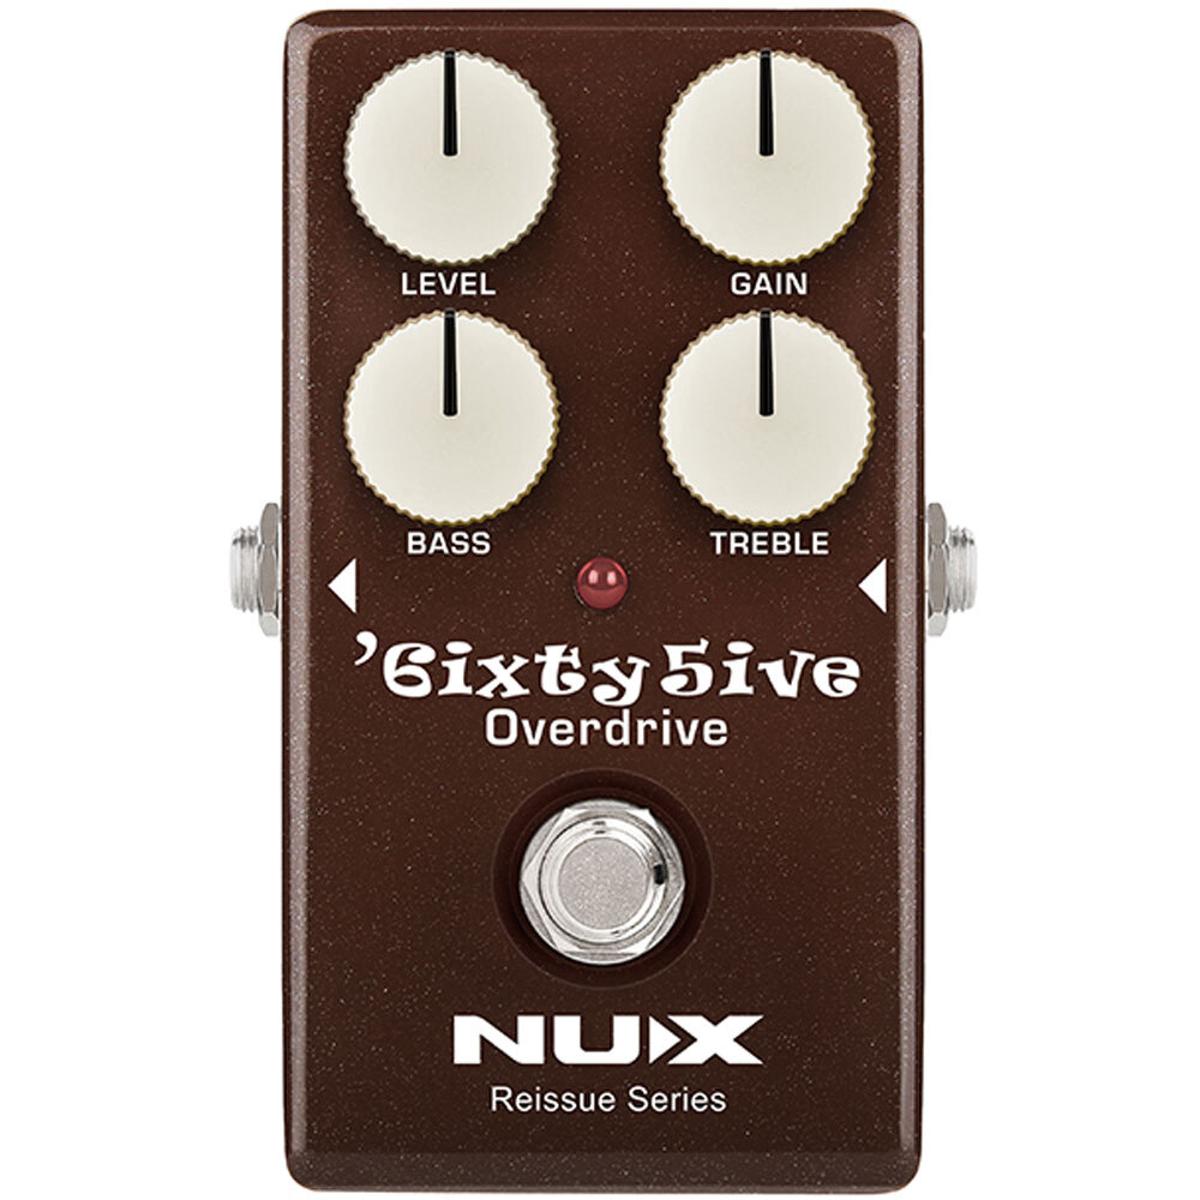 NU-X NX65 Reissue Series 6ixty5ive Overdrive Effects Pedal